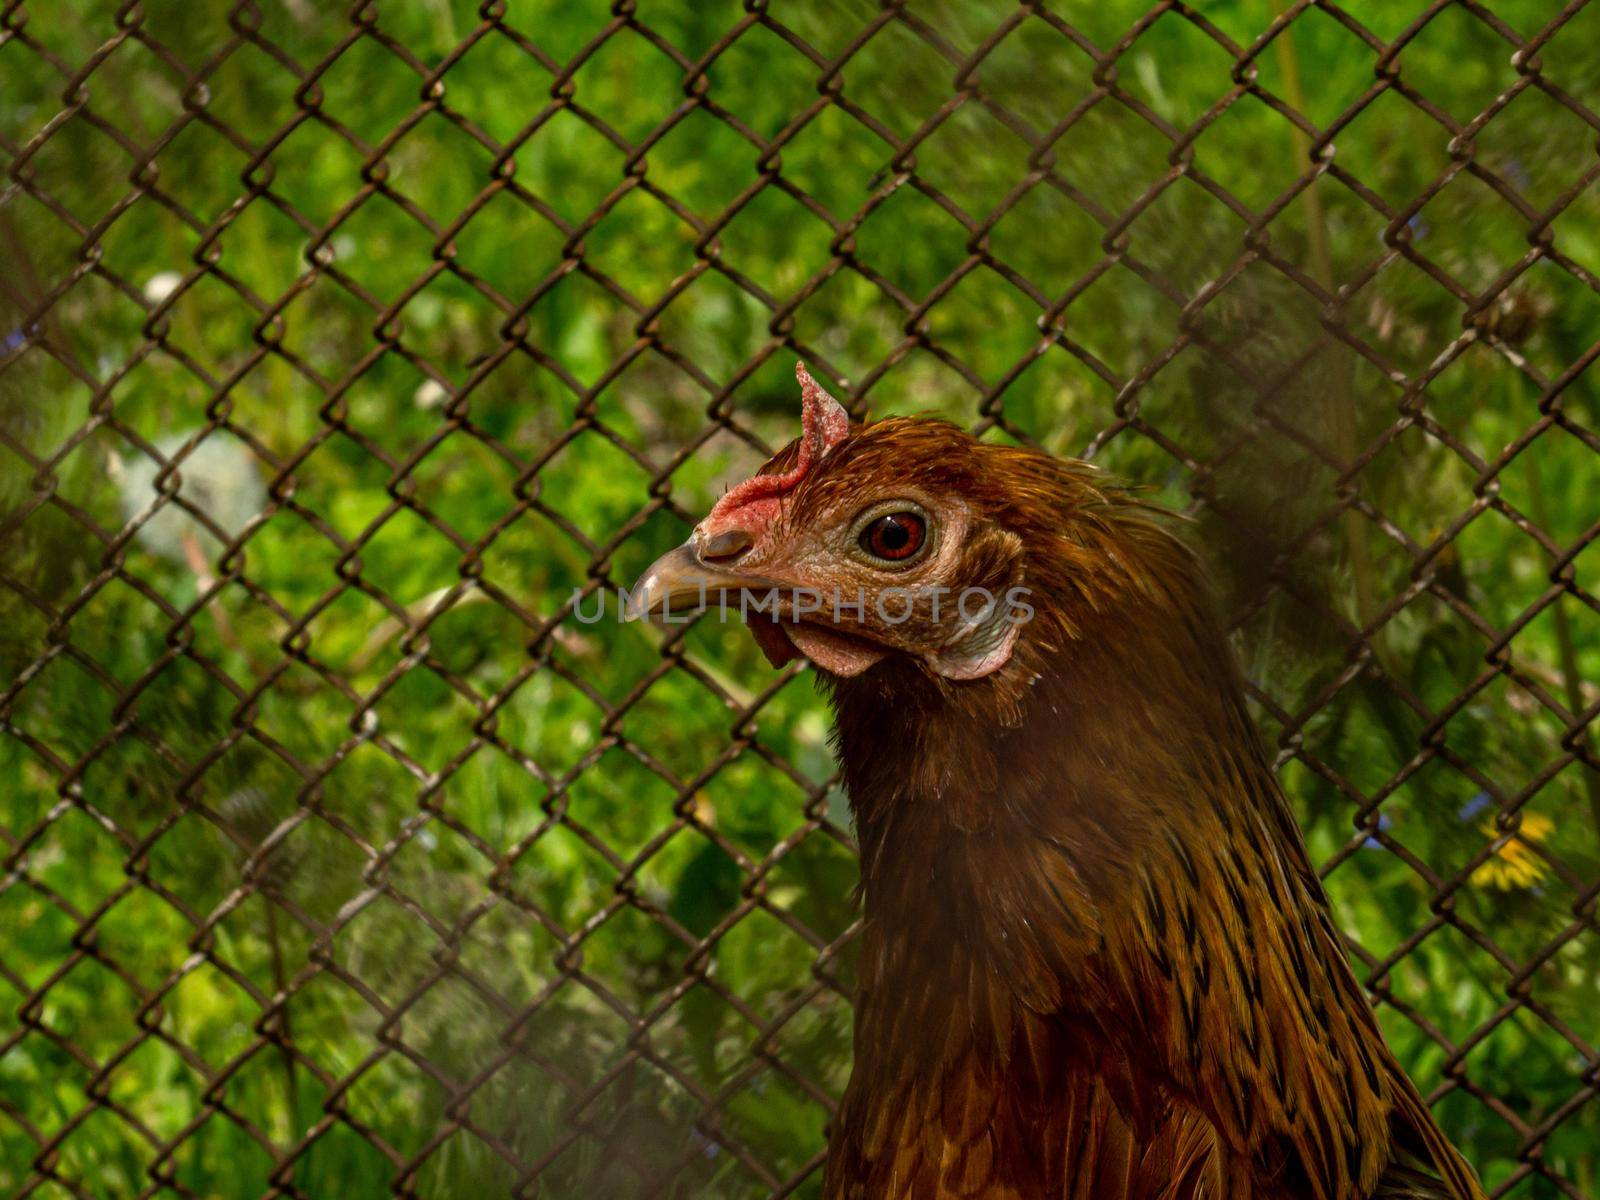 Brown chicken looking around in cage